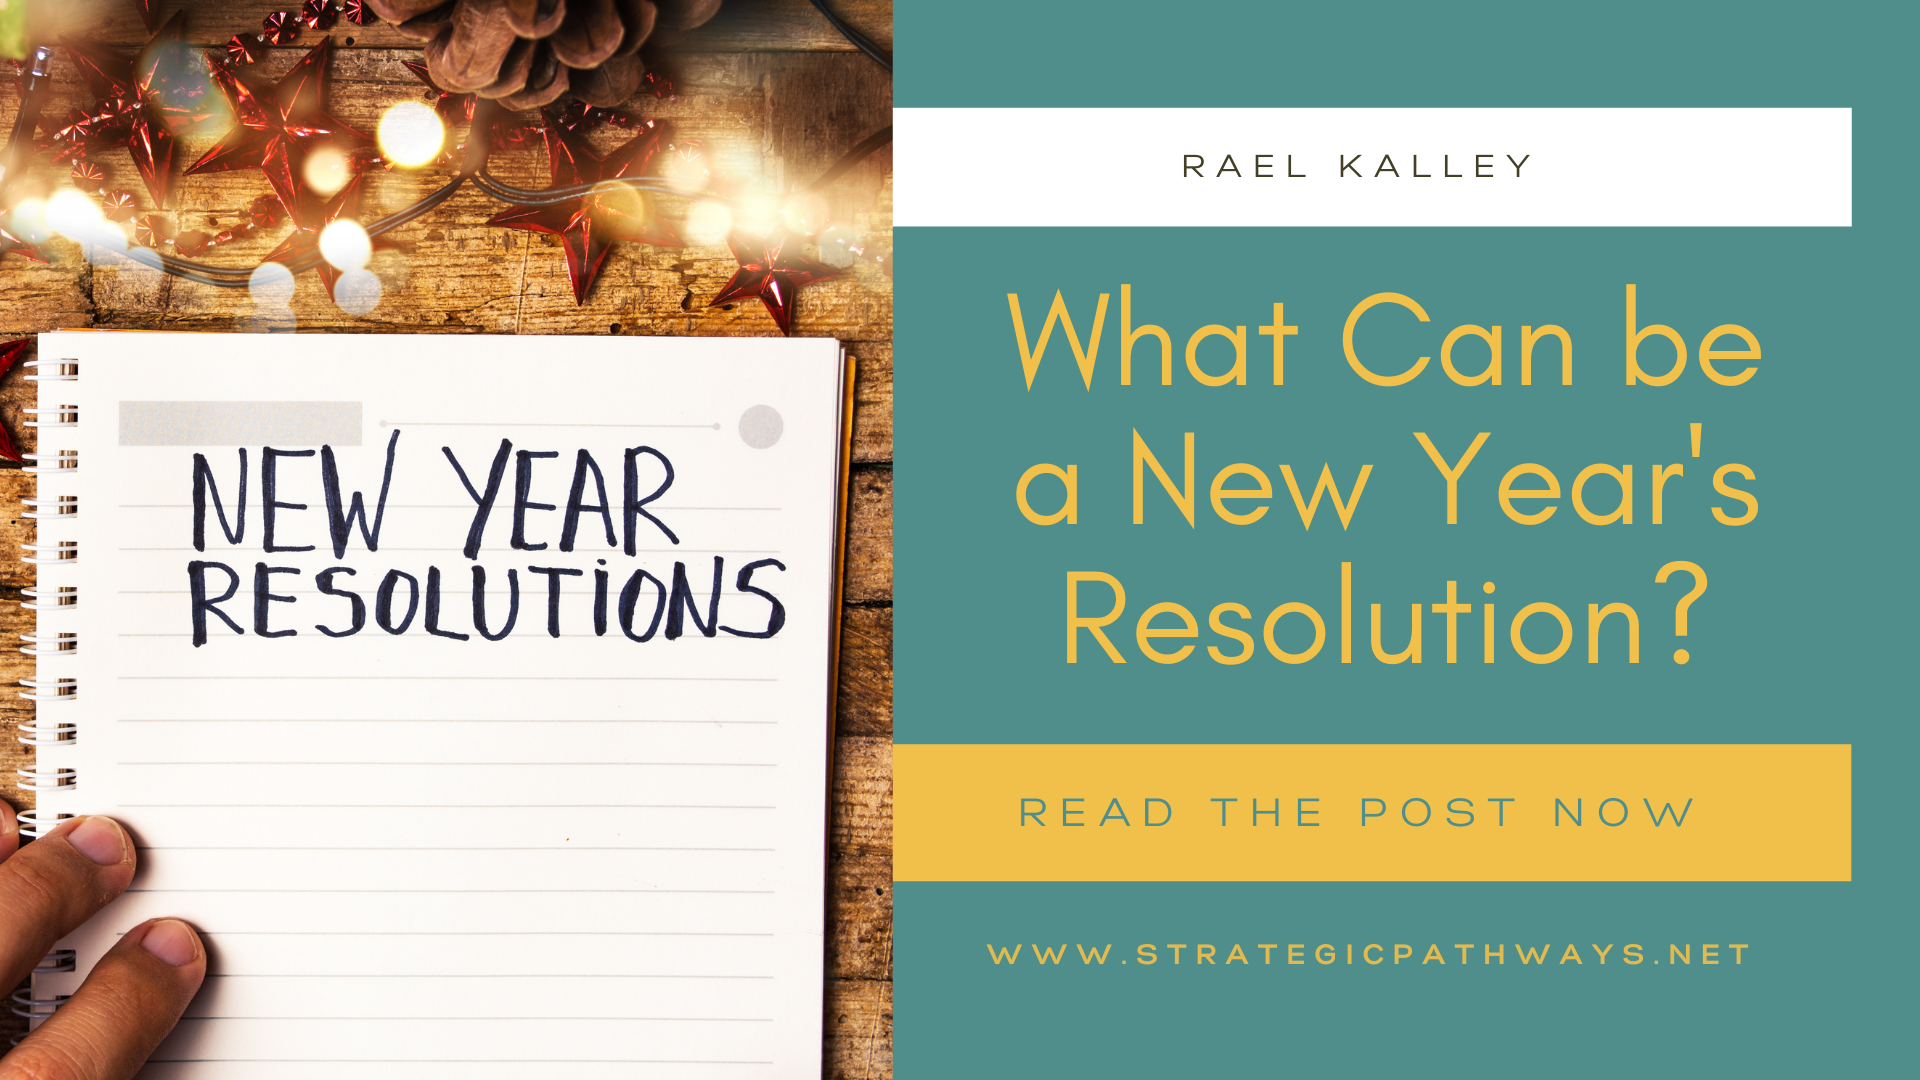 Text says "What Can be a New Year's Resolution?" and image is a notebook